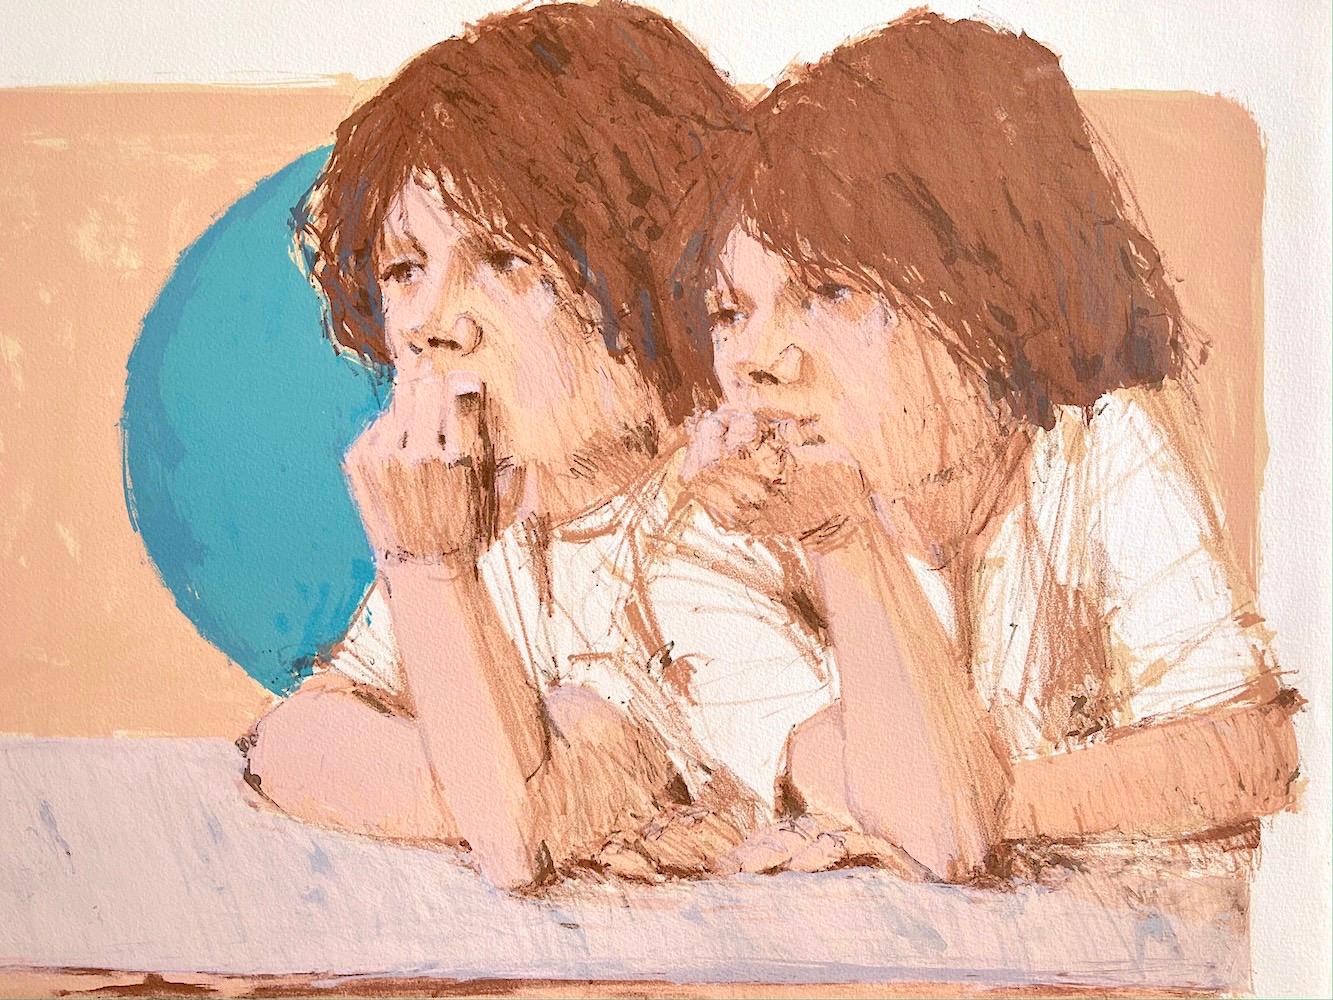 BROTHERS Signed Lithograph, Portrait Young Boys, Peach, Turquoise, Pink, Brown - Print by Aldo Luongo